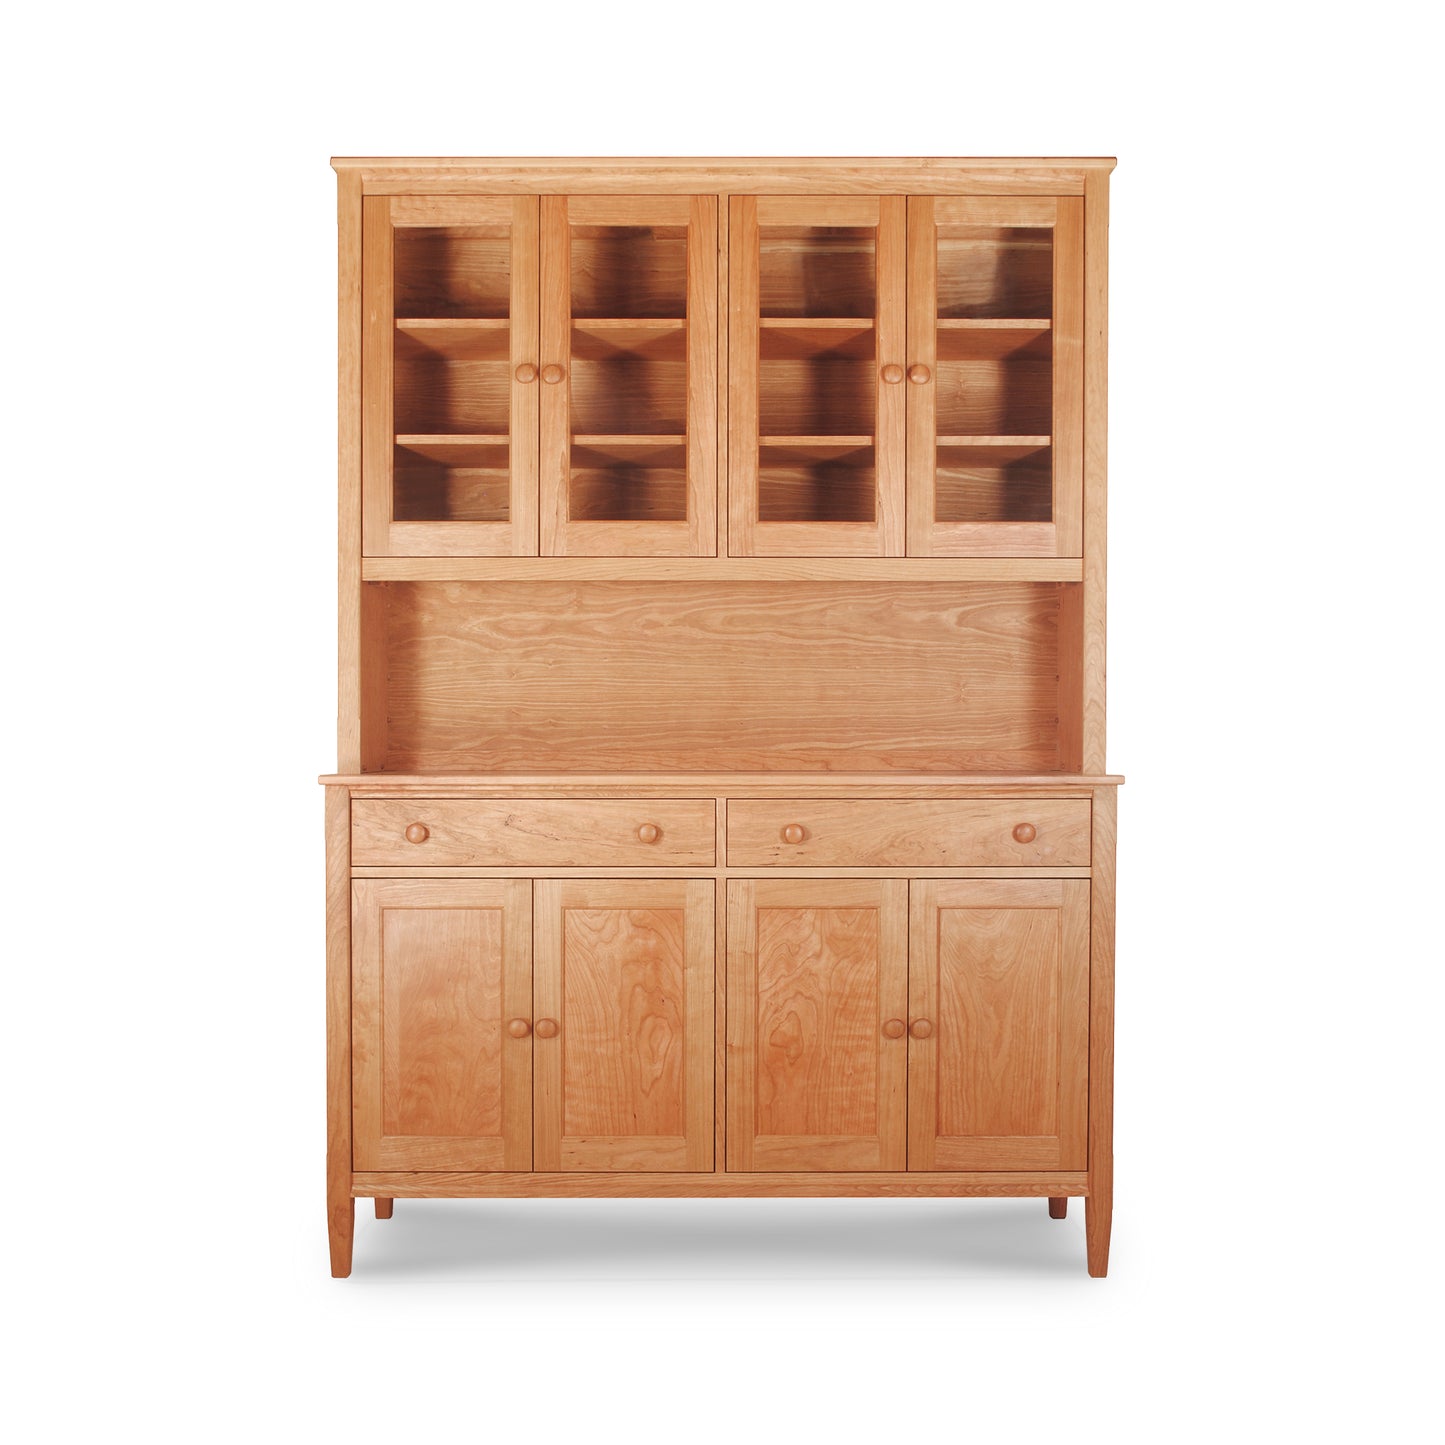 A Maple Corner Woodworks Vermont Shaker Large China Cabinet with an upper display cabinet featuring open shelving and a lower cabinet with closed doors, isolated on a white background.